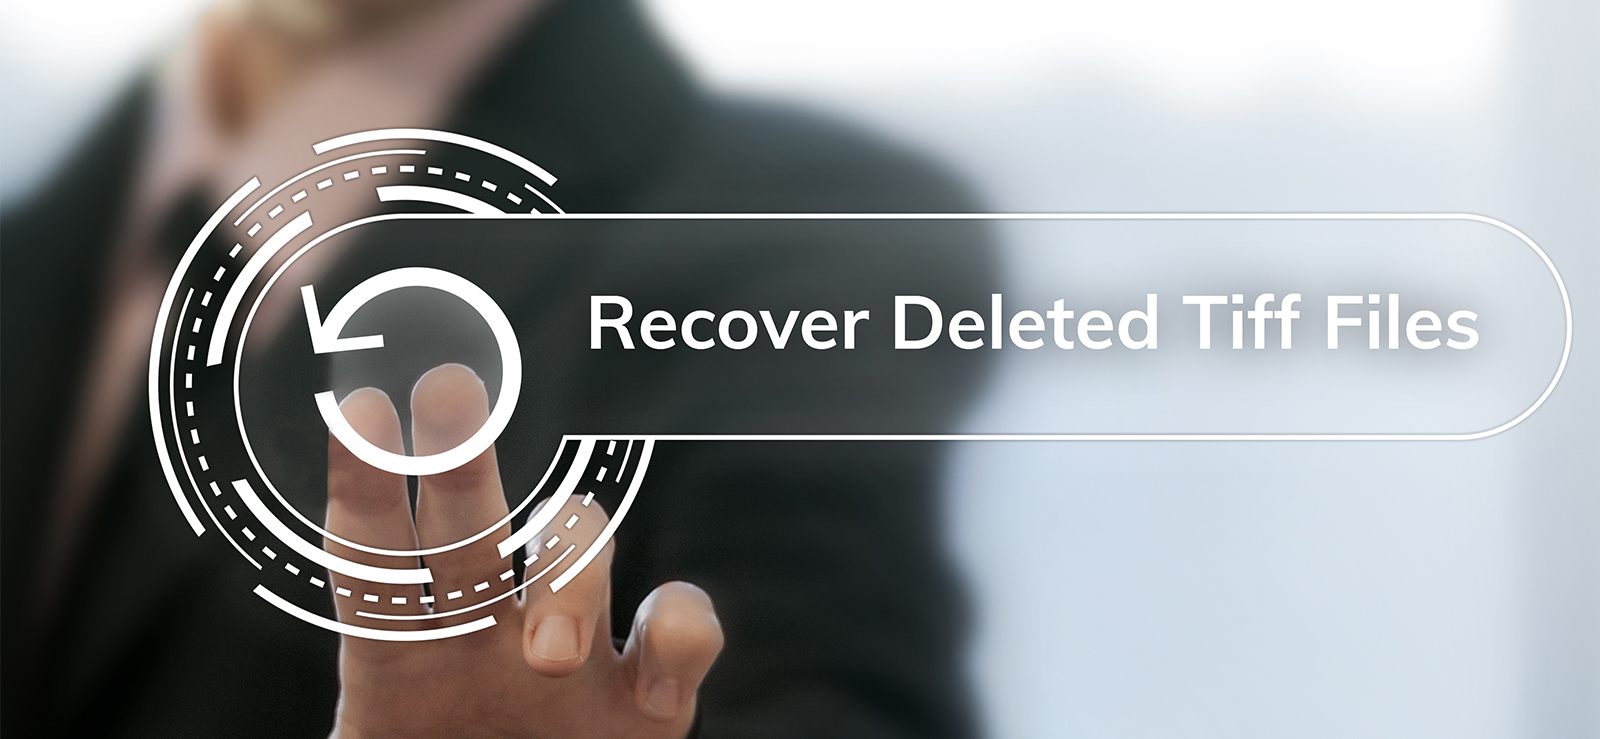 How To Recover Deleted Tiff Files?